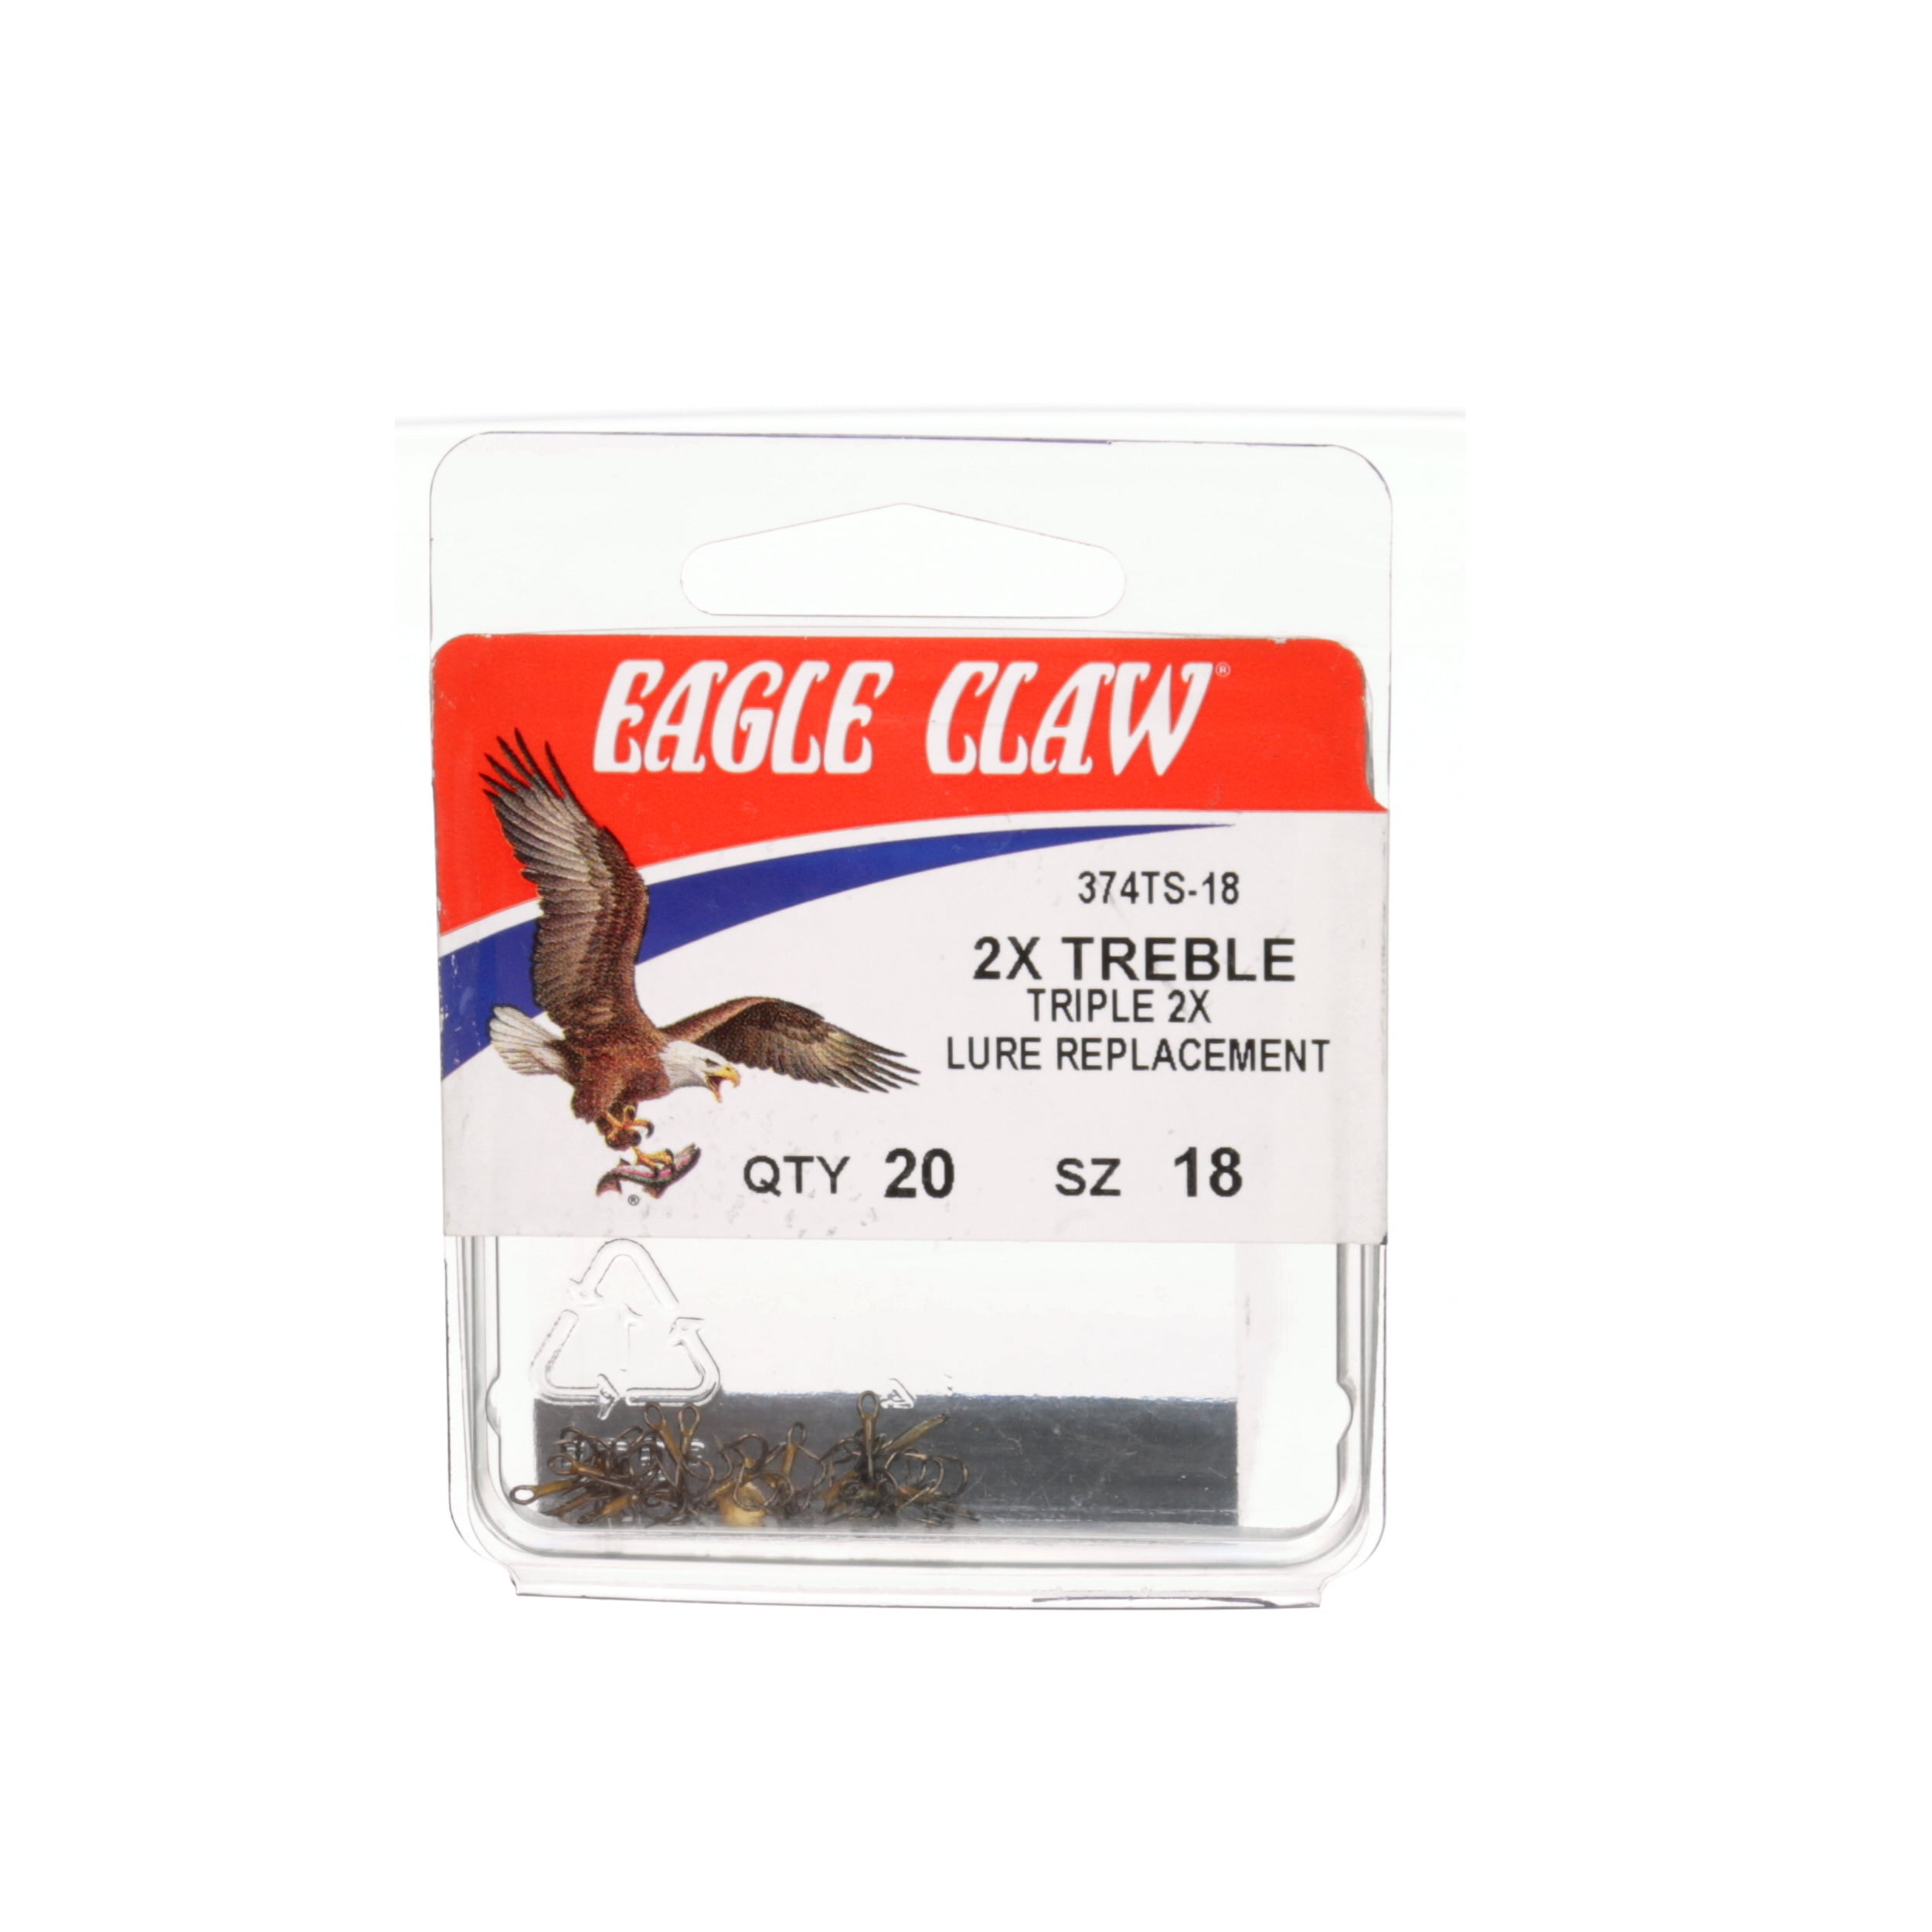 2 packs of 5 Eagle Claw Bronze Treble Hooks Size 10 #374R 